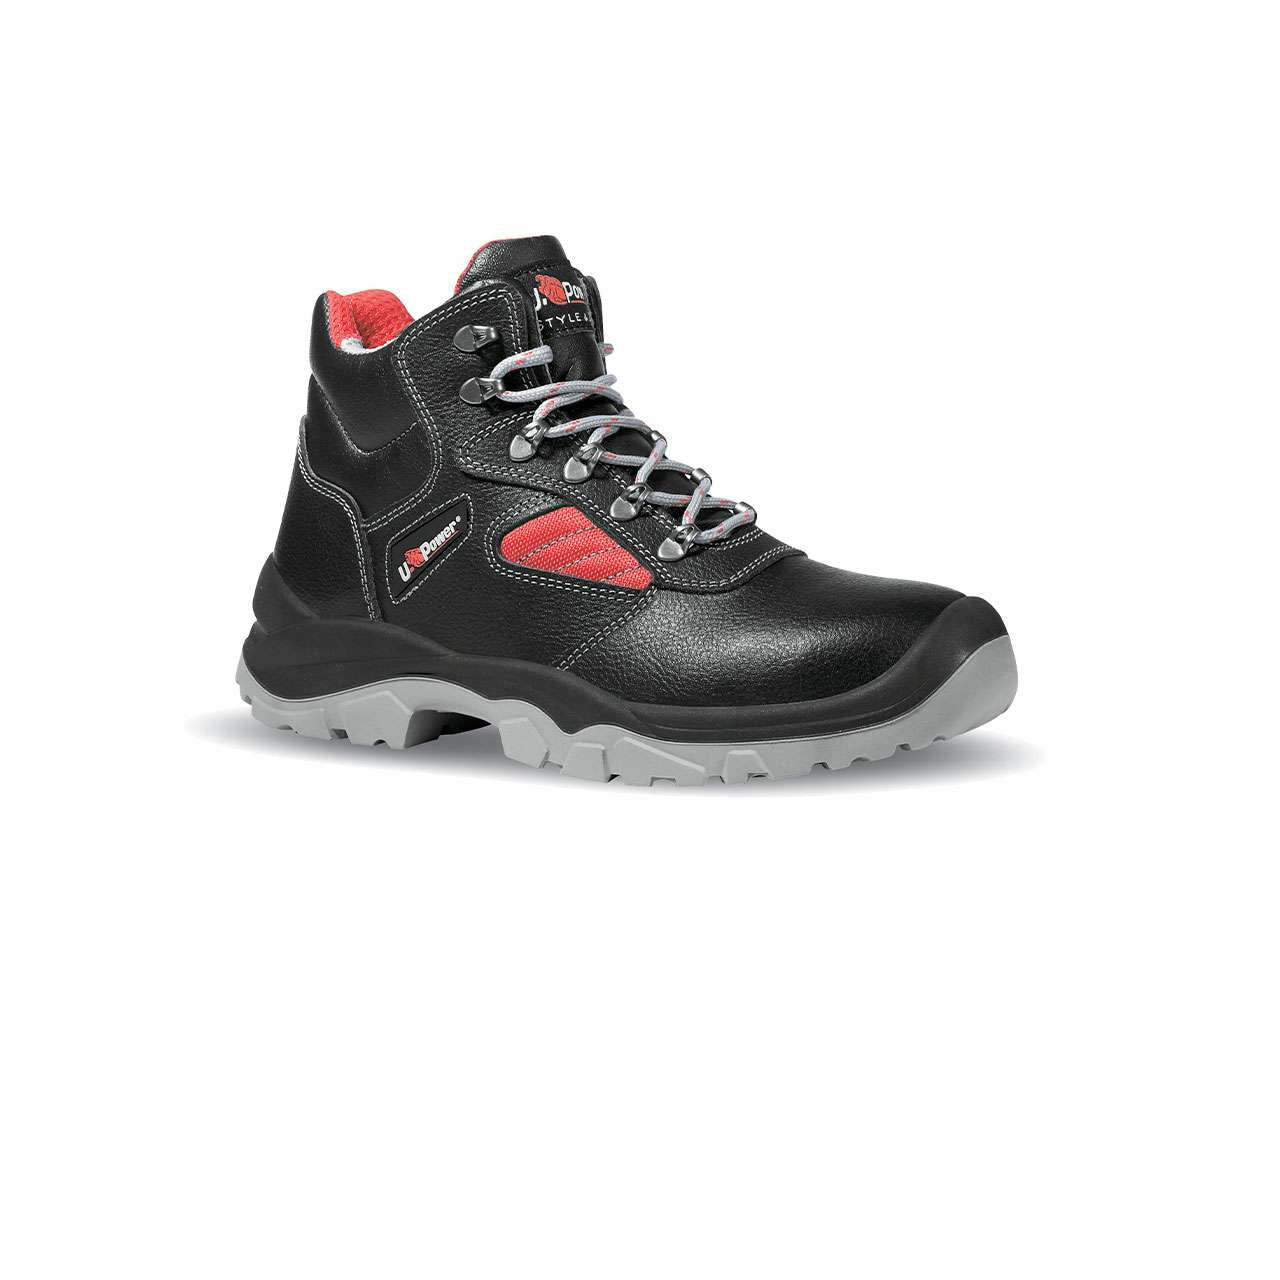 Safety Shoes high, classic and strong - U-Power Mayon S3 SRC